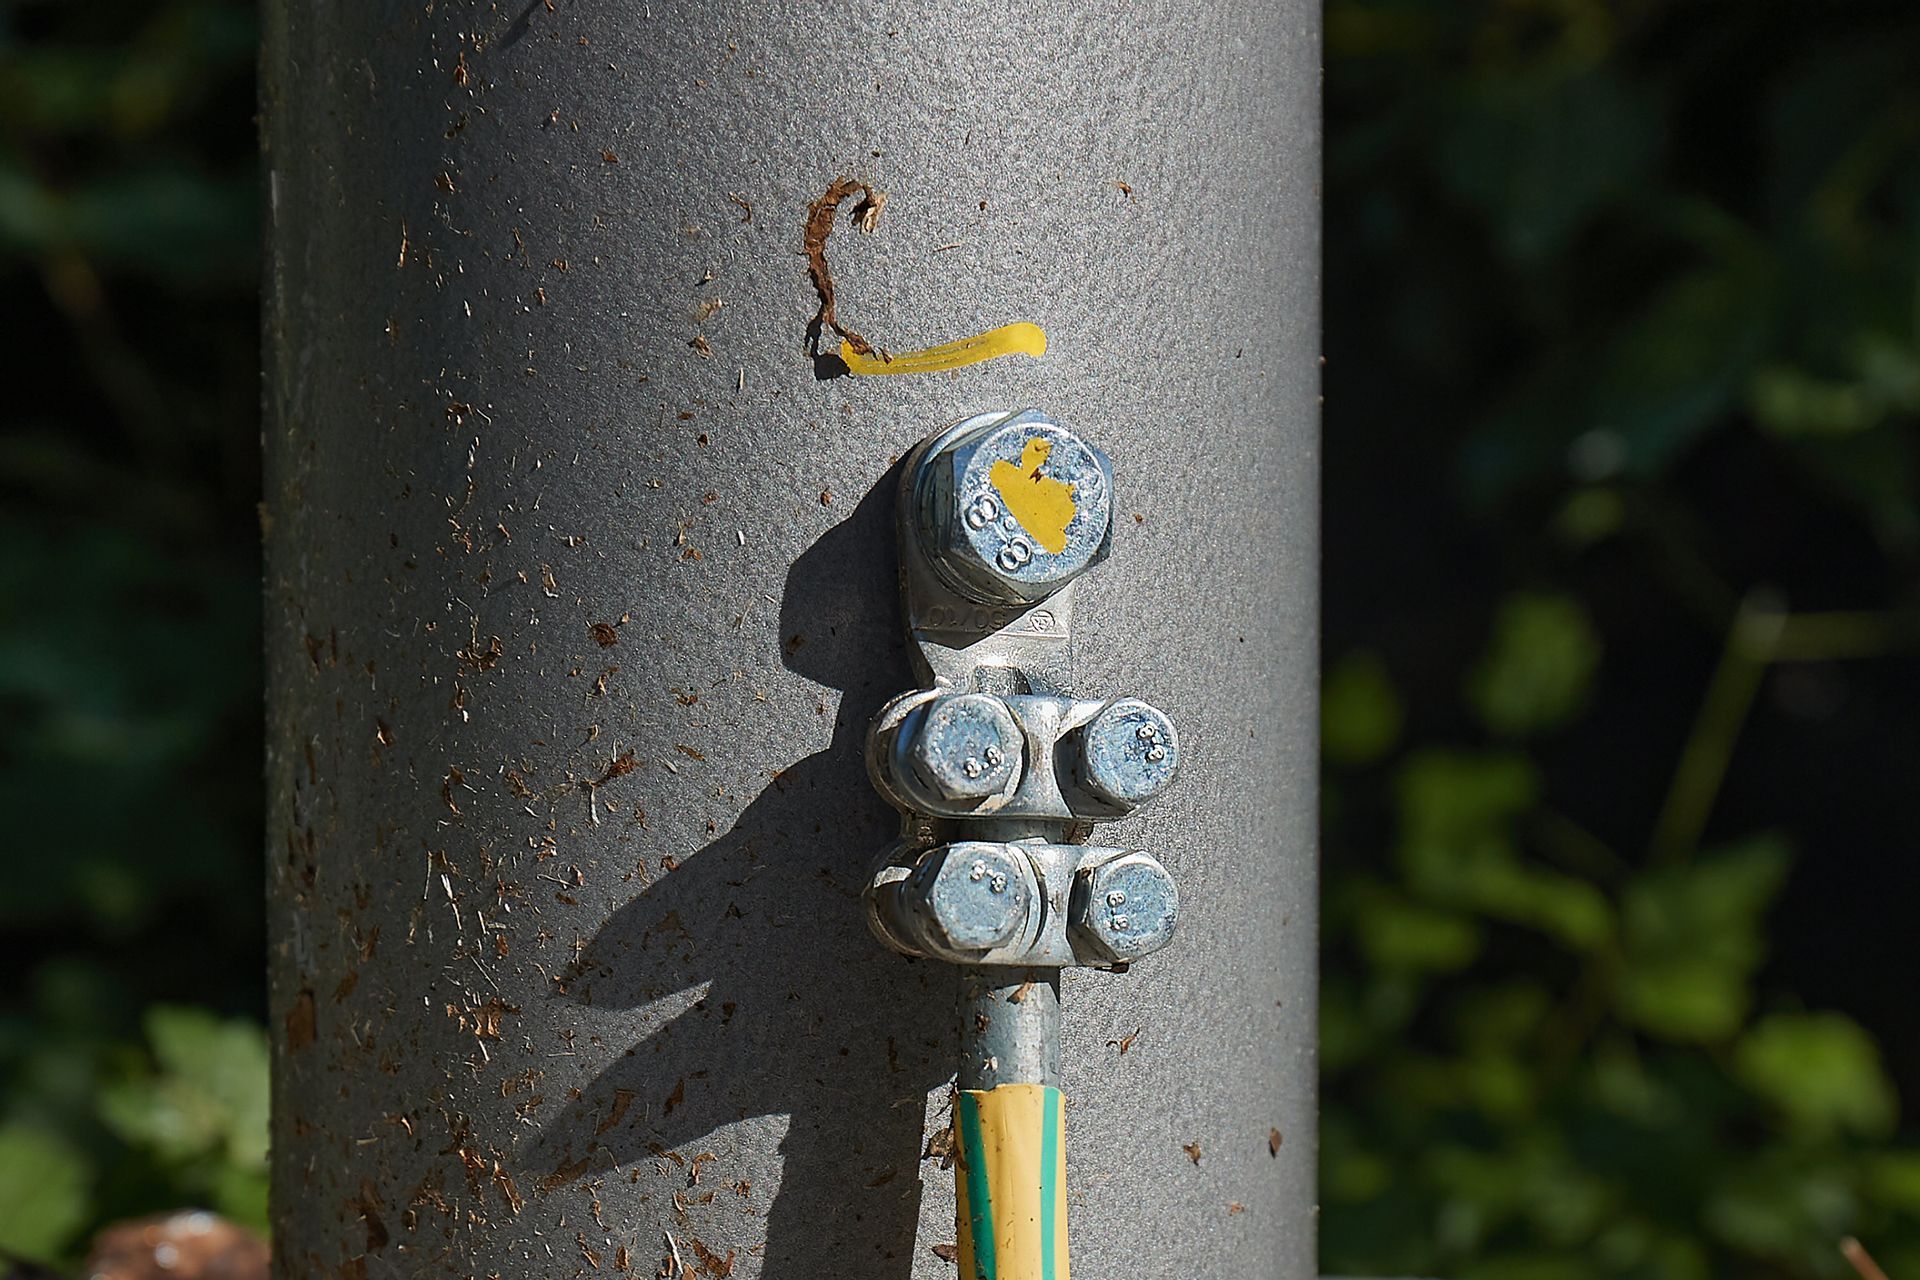 A close up of a metal pole with a yellow and green wire attached to it.